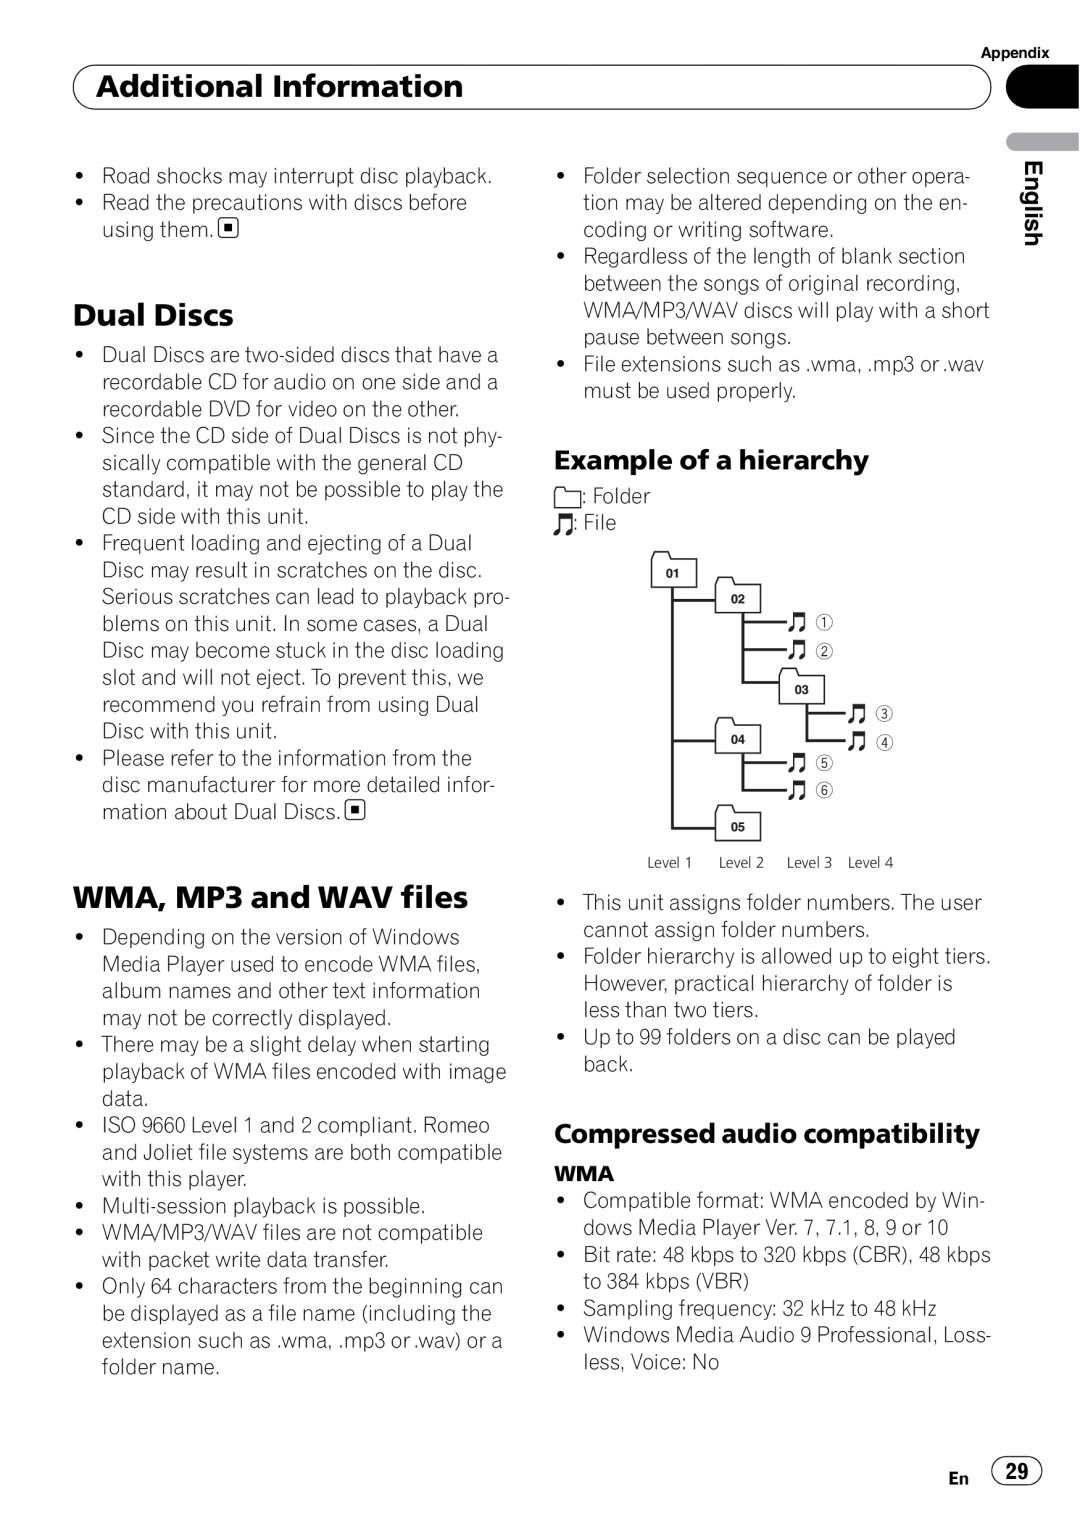 Sony DEH-P2900MP Dual Discs, WMA, MP3 and WAV files, Example of a hierarchy, Compressed audio compatibility 